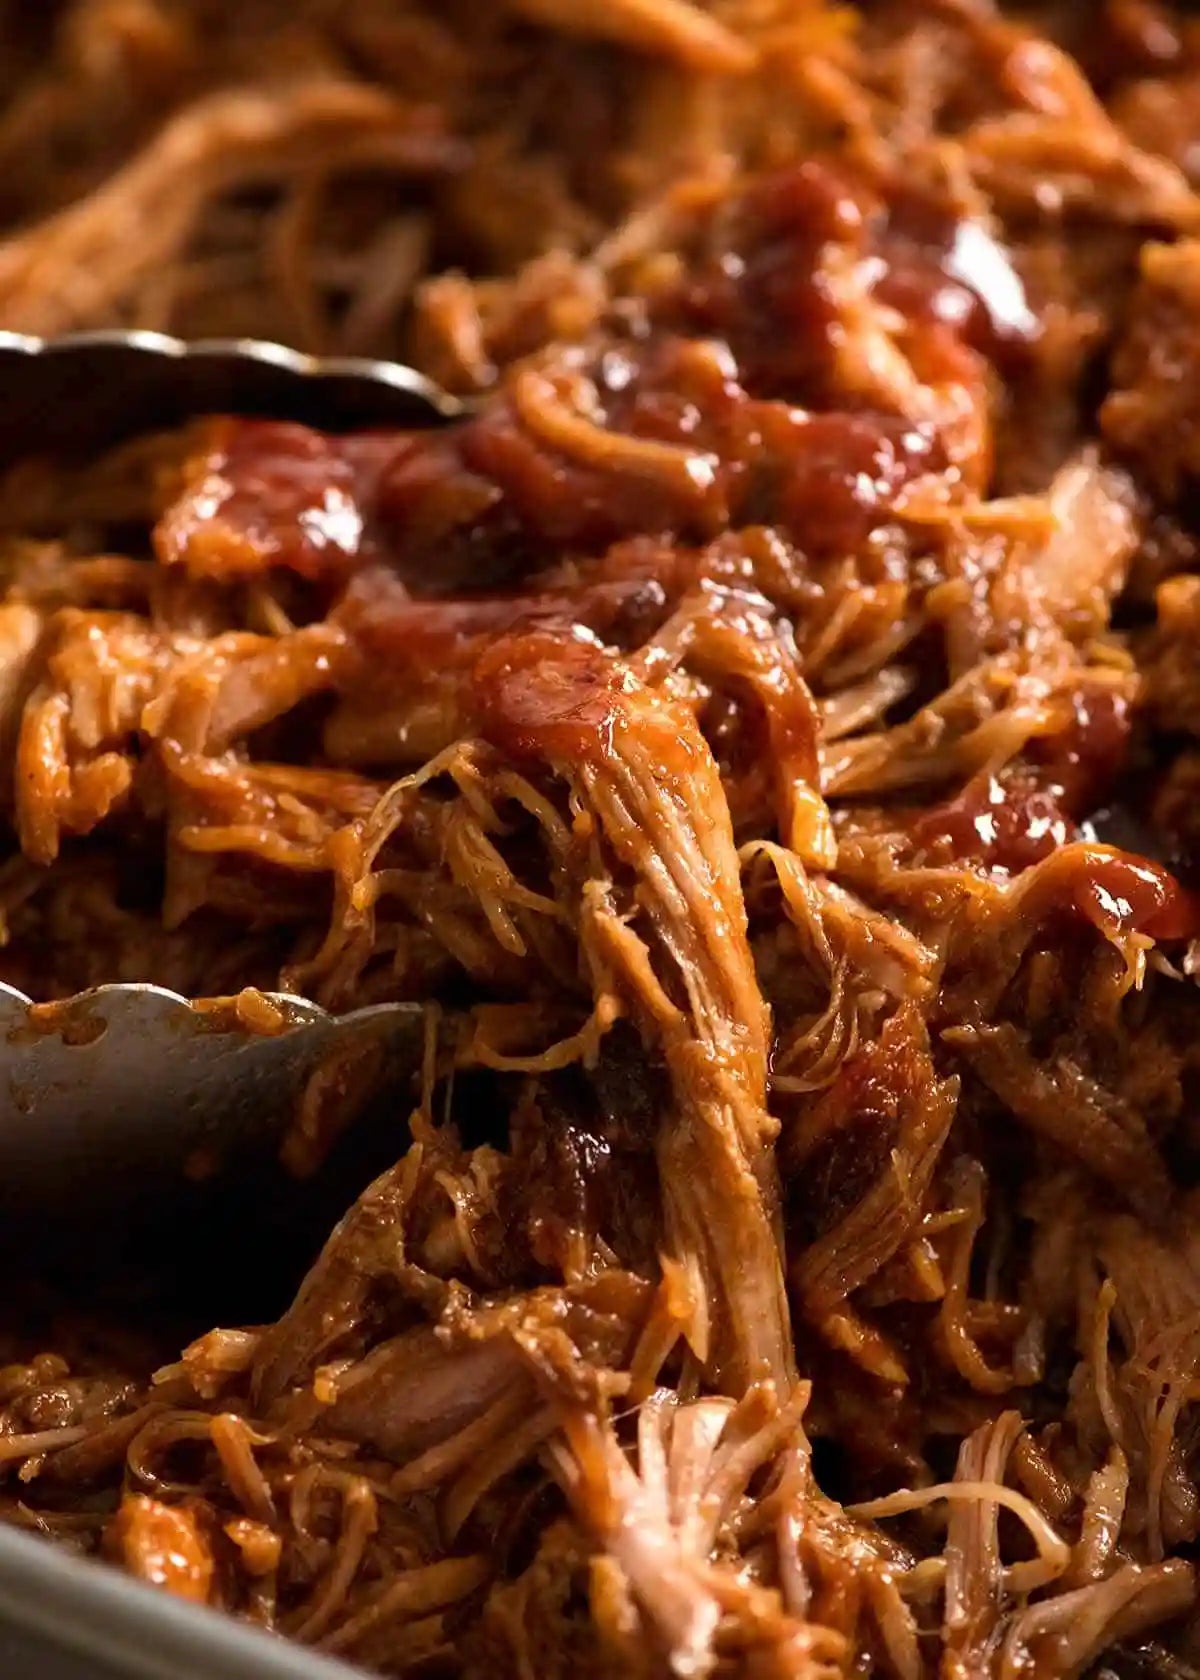 Manea's Shredded/Pulled Pork with BBQ Sauce 1lb